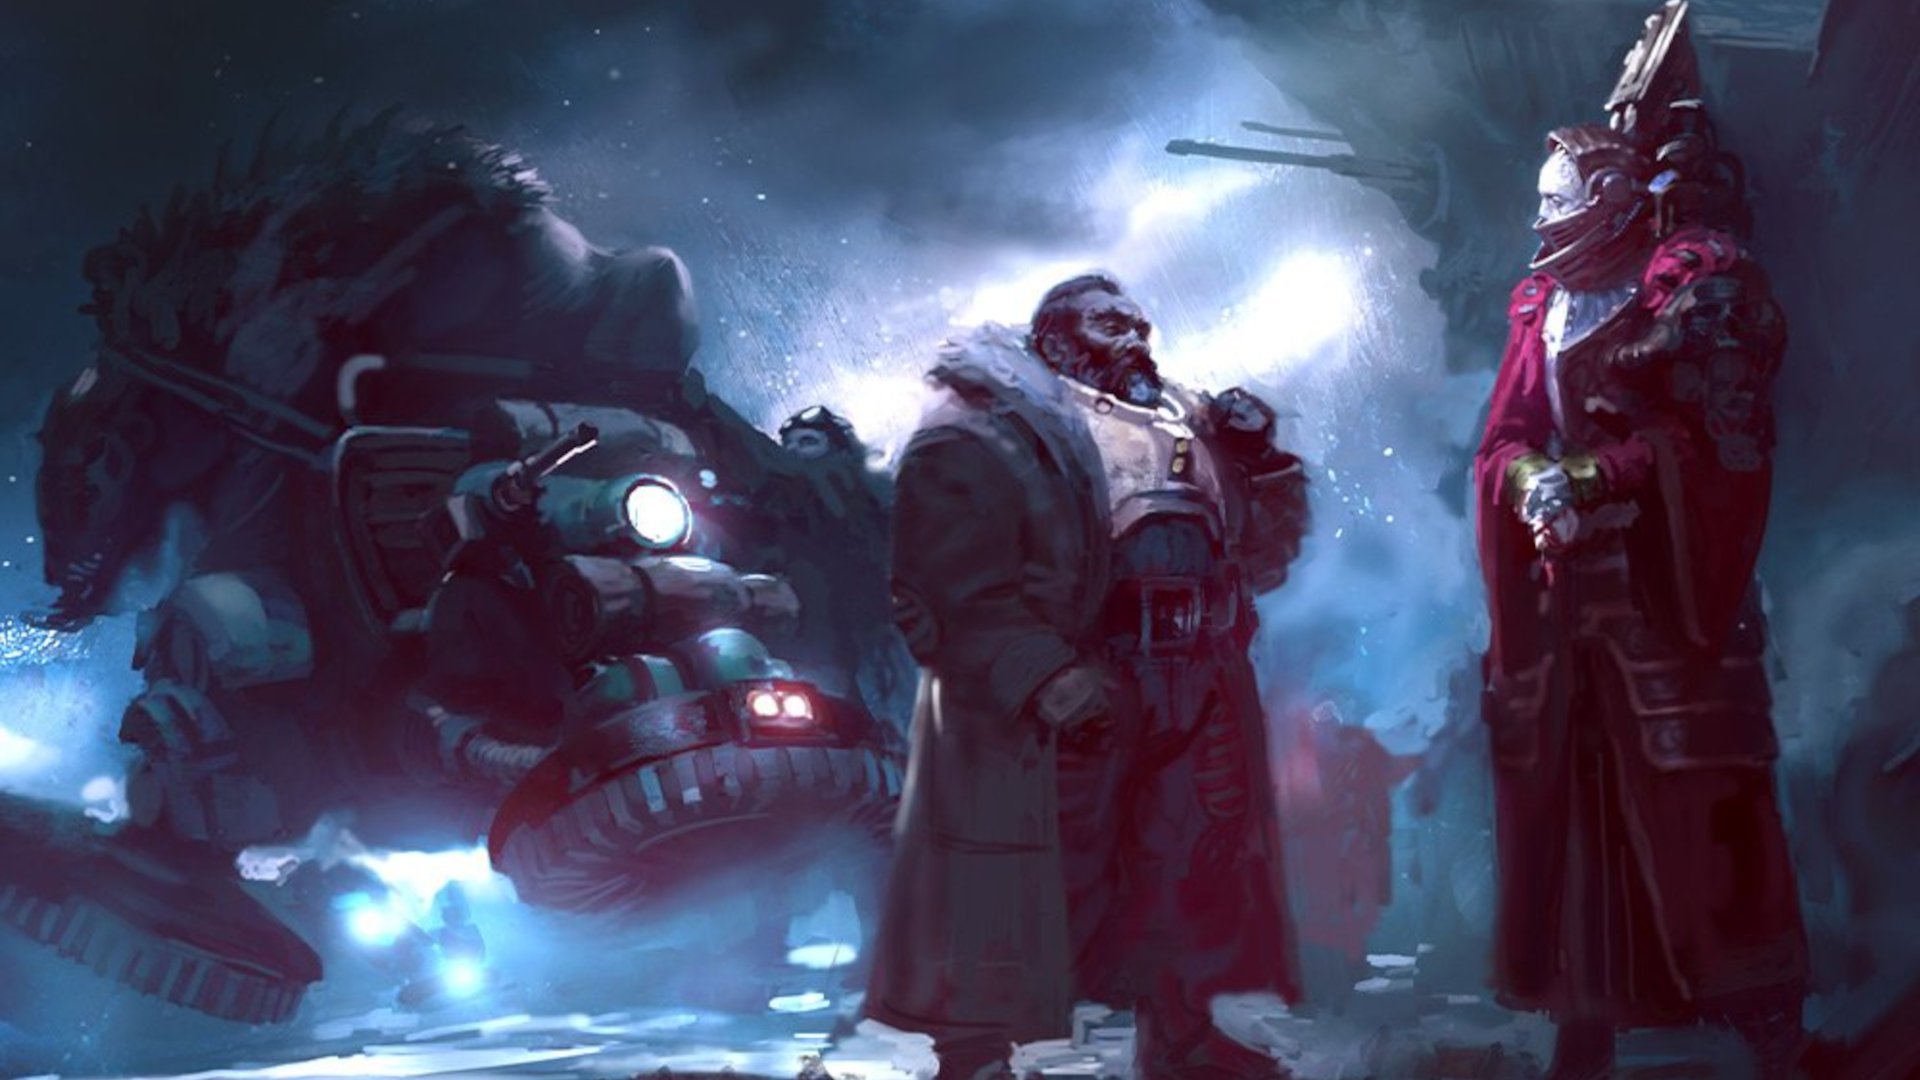 Warhammer 40k Leagues of Votann guide - Games Workshop artwork showing a Hernkyn Pioneer speaking with an unknown xenos